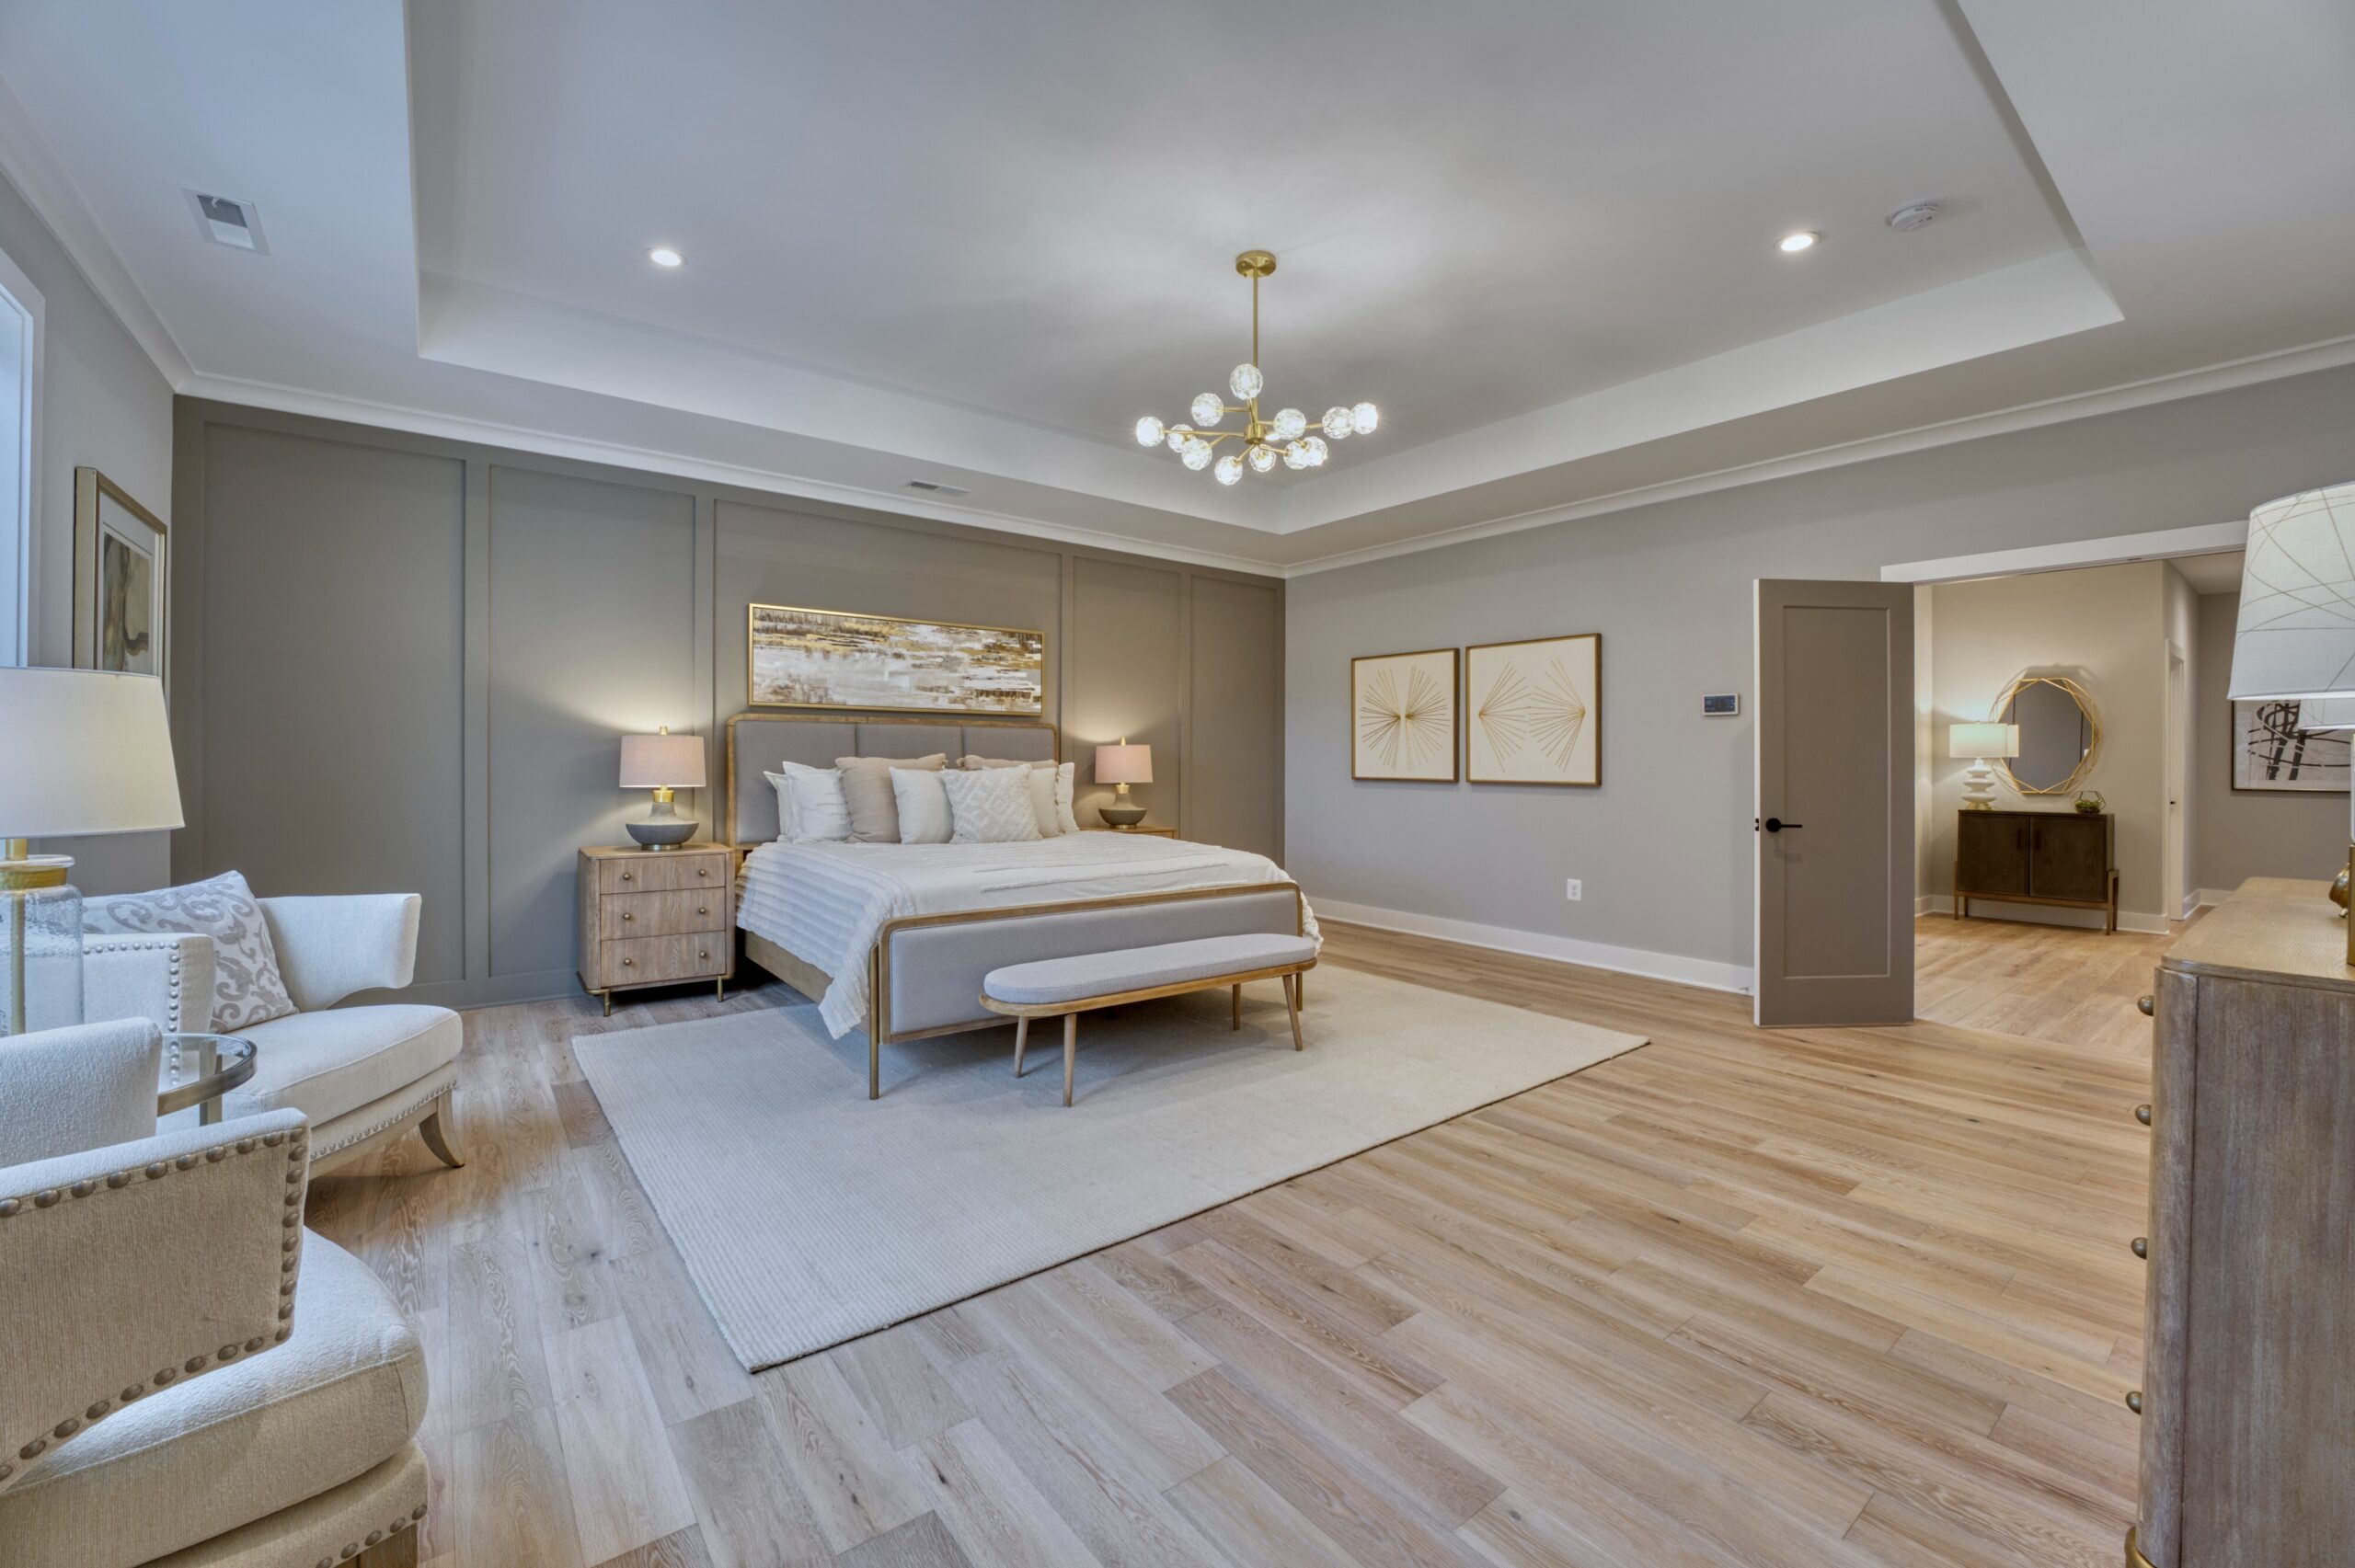 Professional interior photo of new construction home at 3400 N Ohio St - showing the primary bedroom with tray ceiling, grey accent wall, and hardwood floors